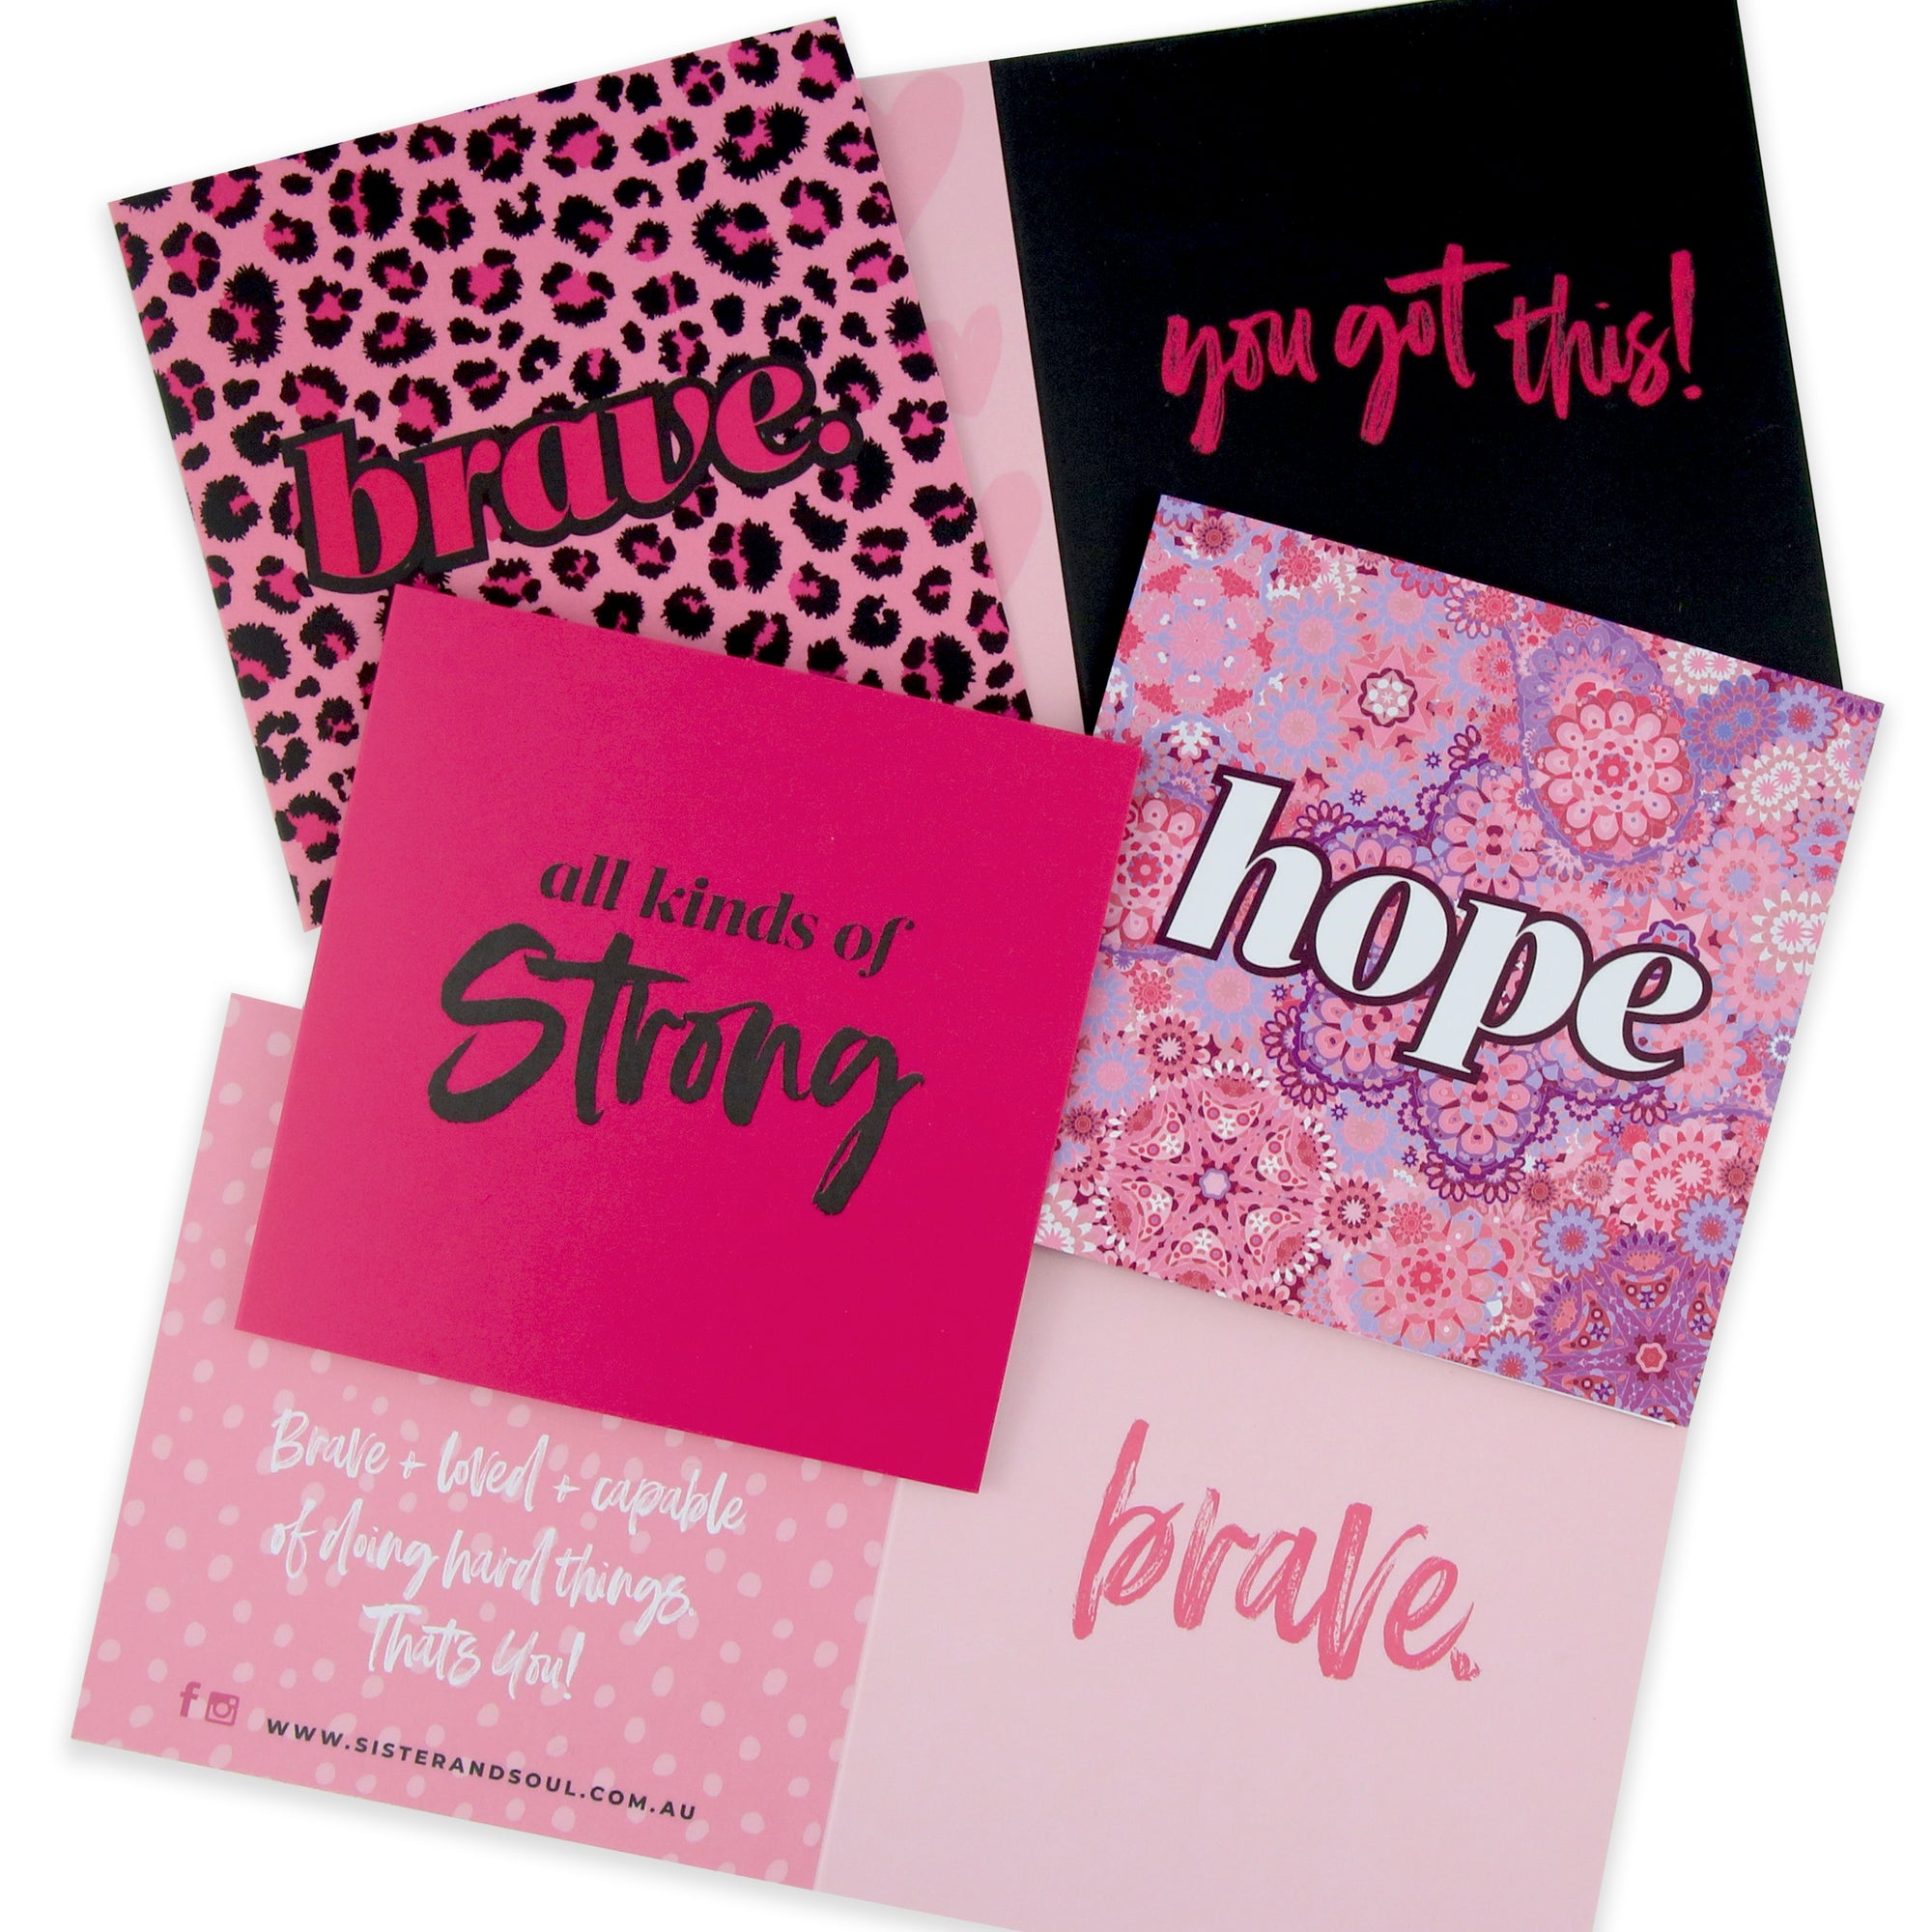 Gift card pack raising money for breast cancer research.